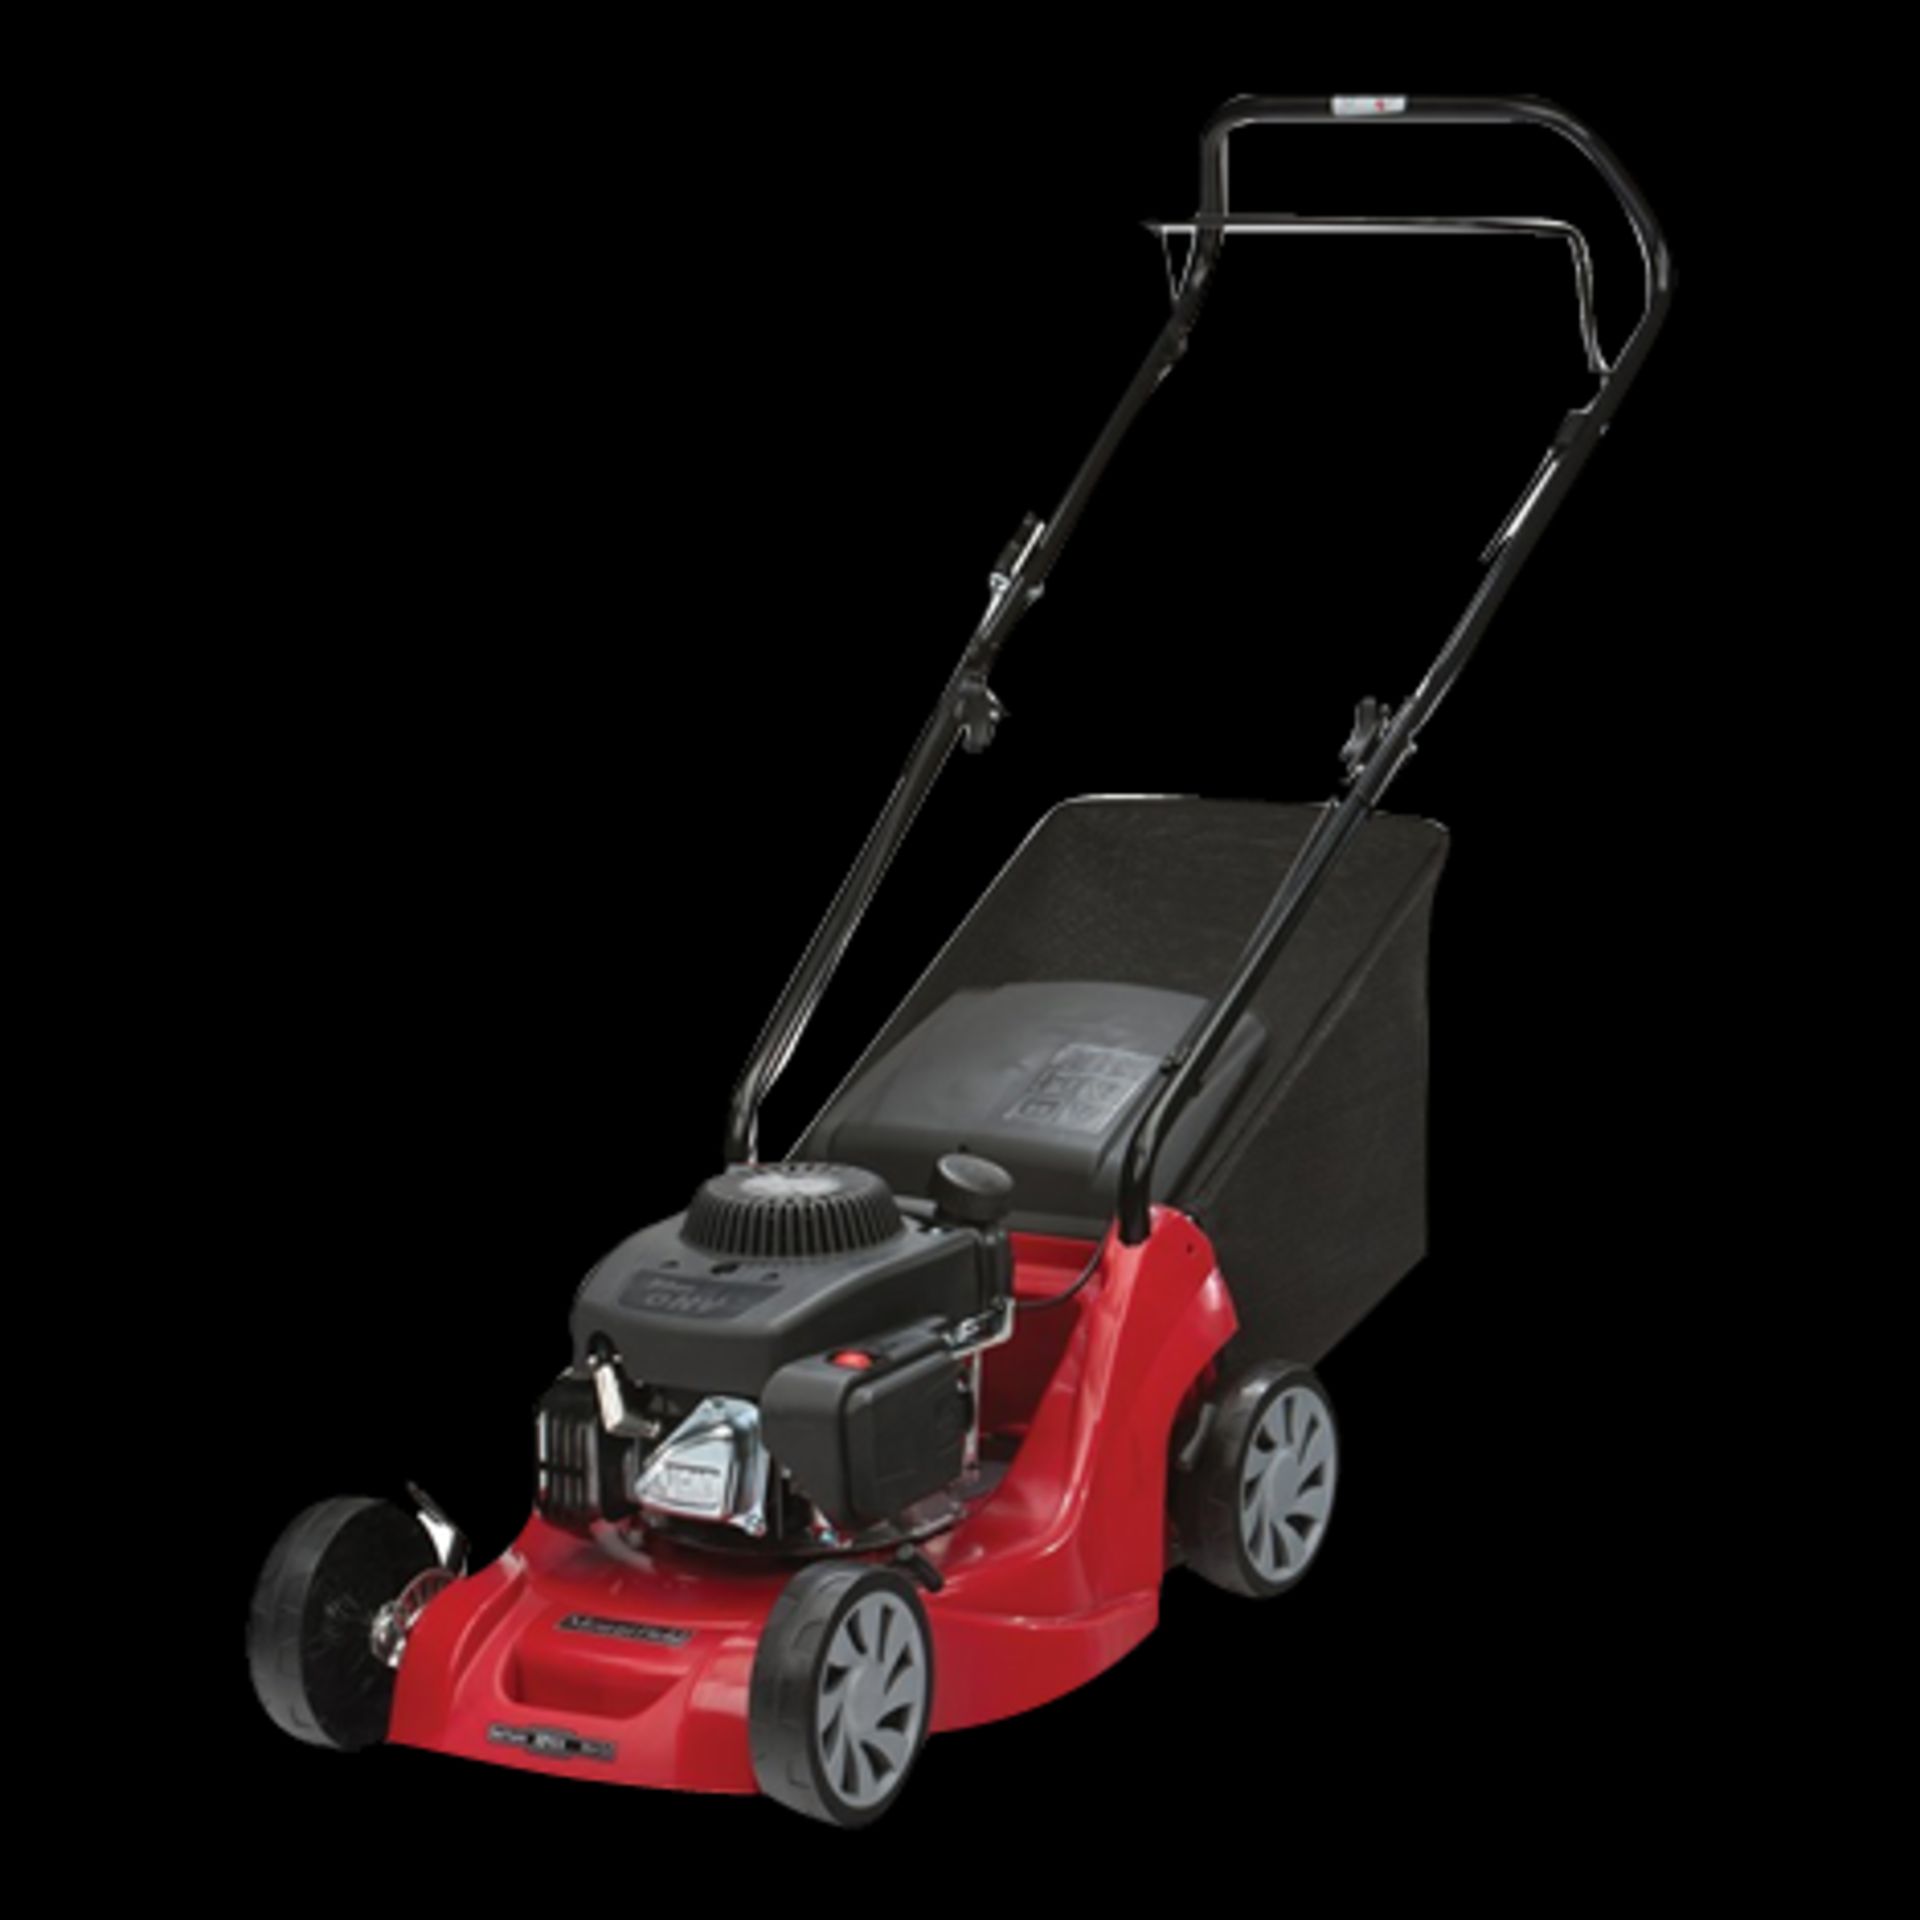 V Brand New Petrol Rotary Lawn Mower X 2 YOUR BID PRICE TO BE MULTIPLIED BY TWO